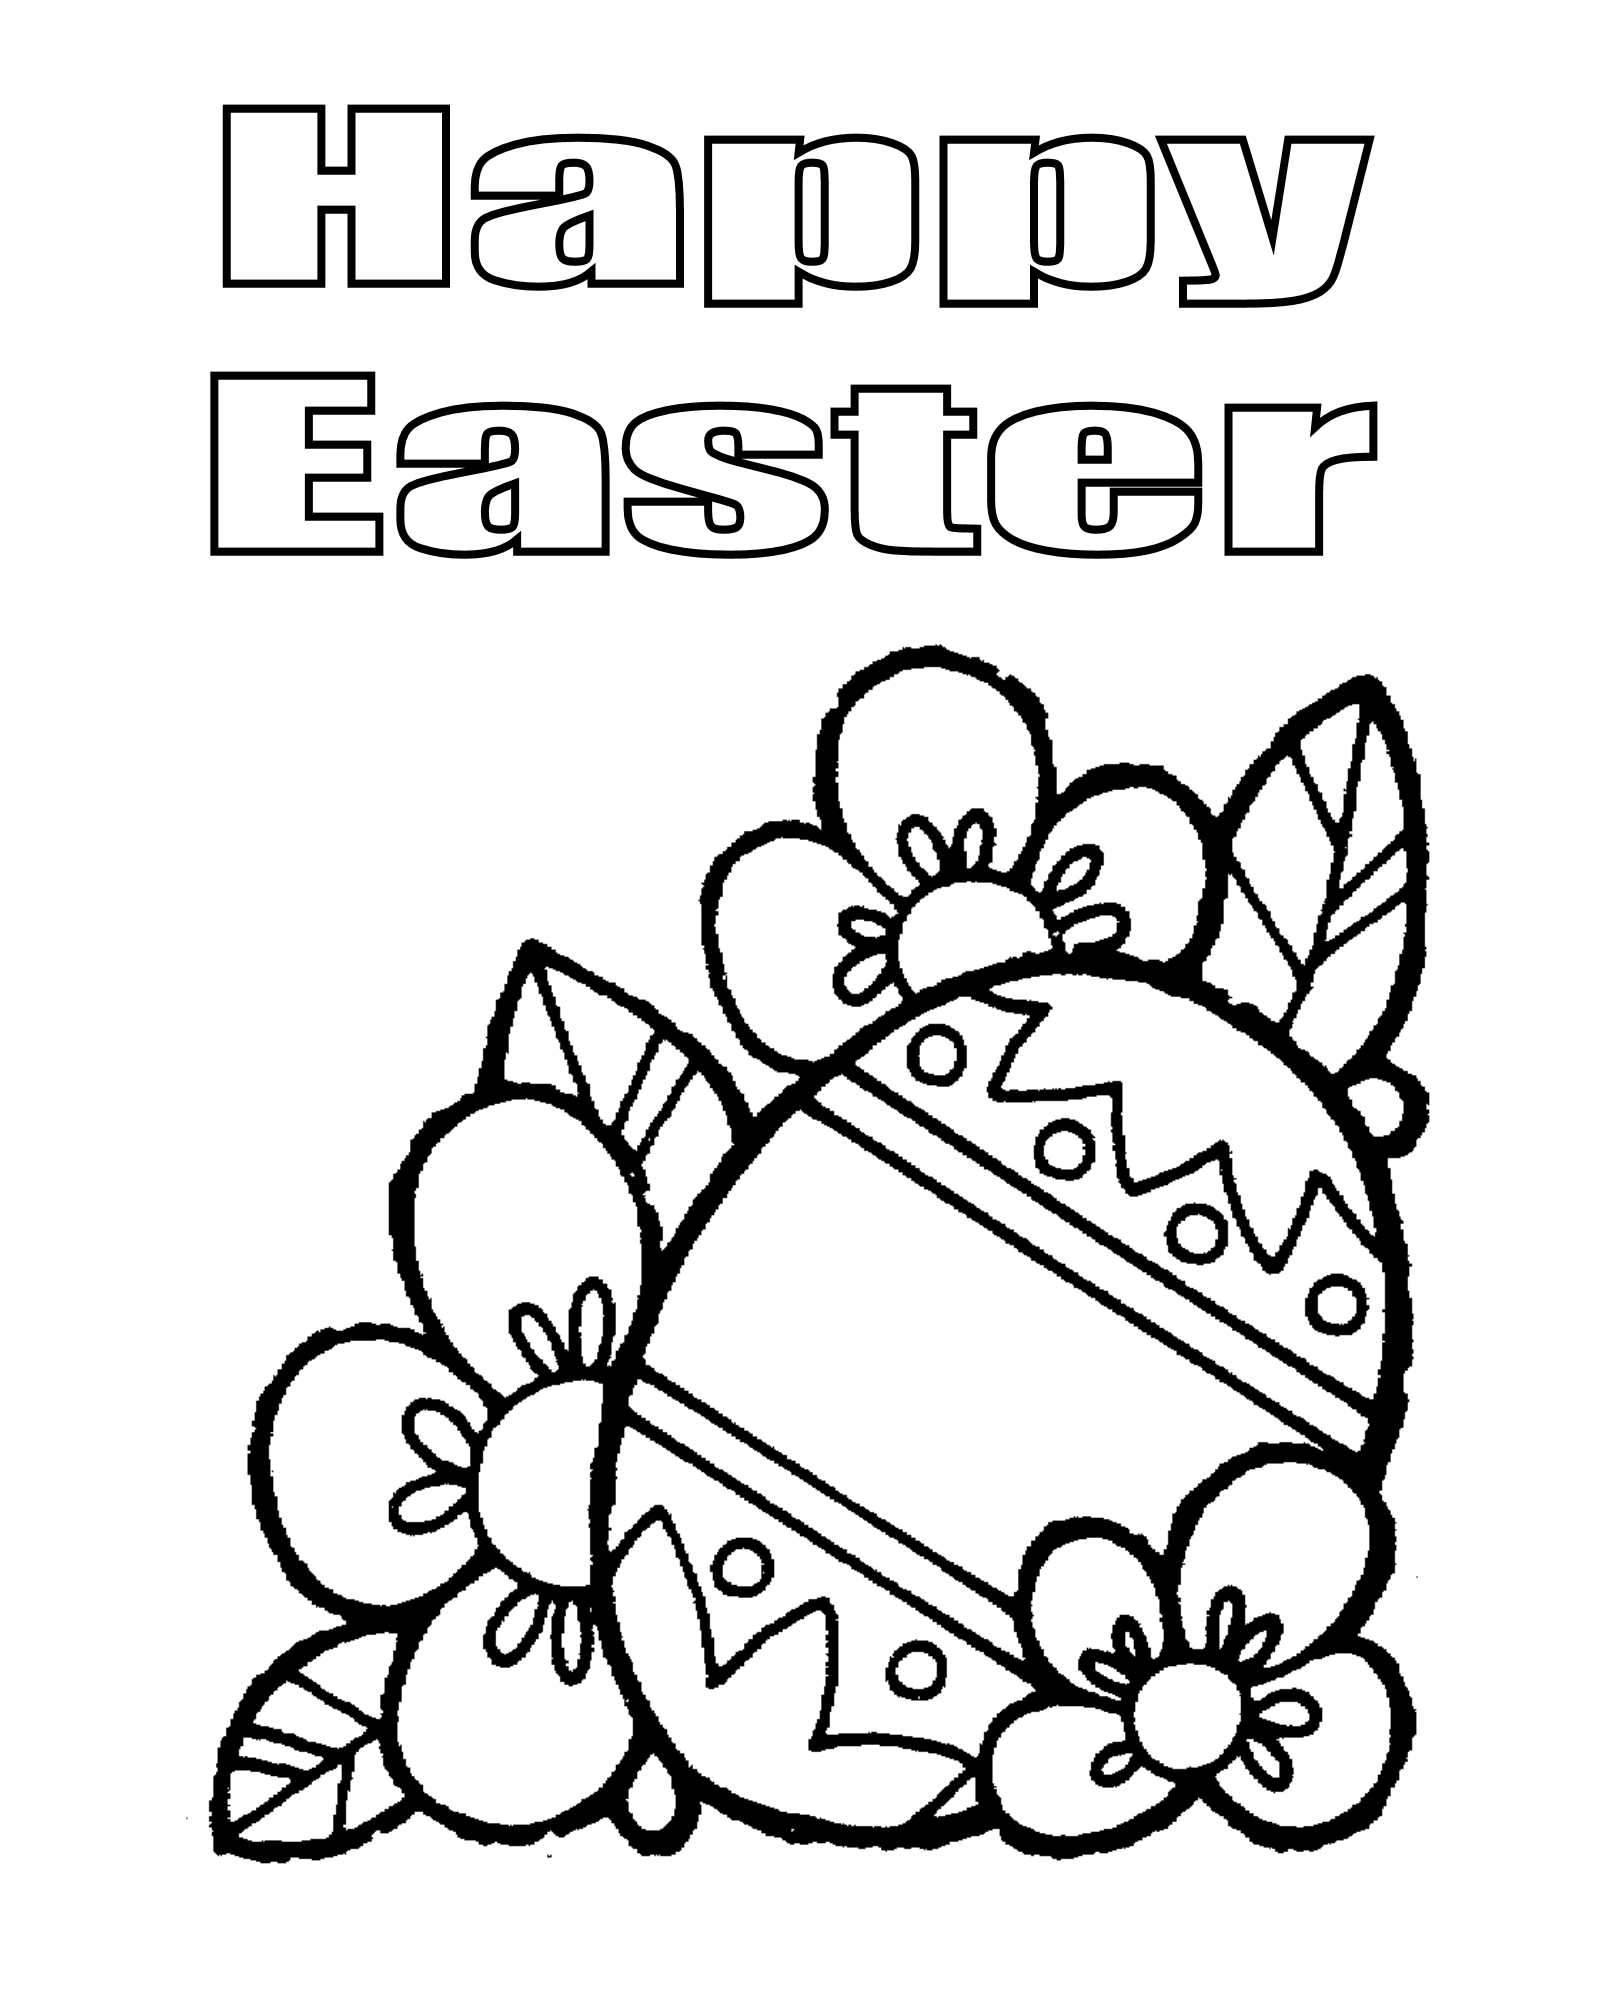 Happy Easter Printable Images